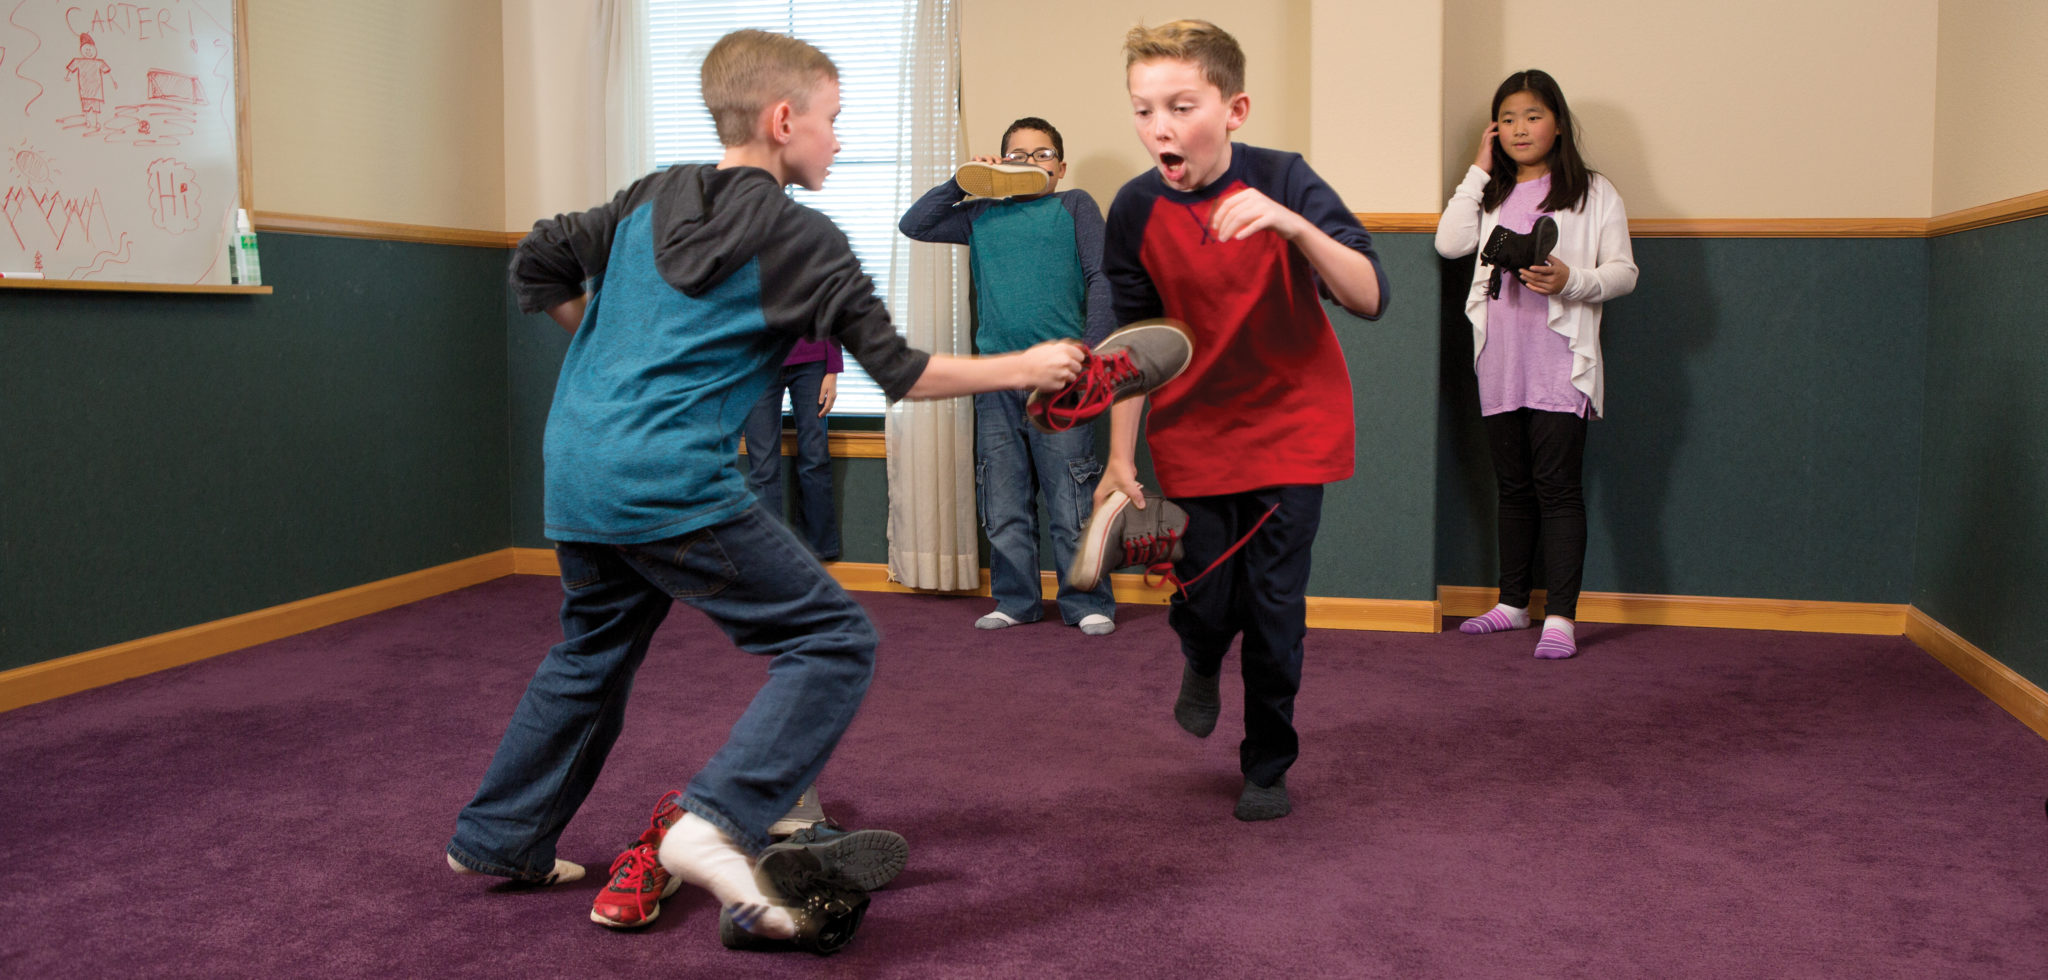 A group of children playing an indoor game involving their shoes.